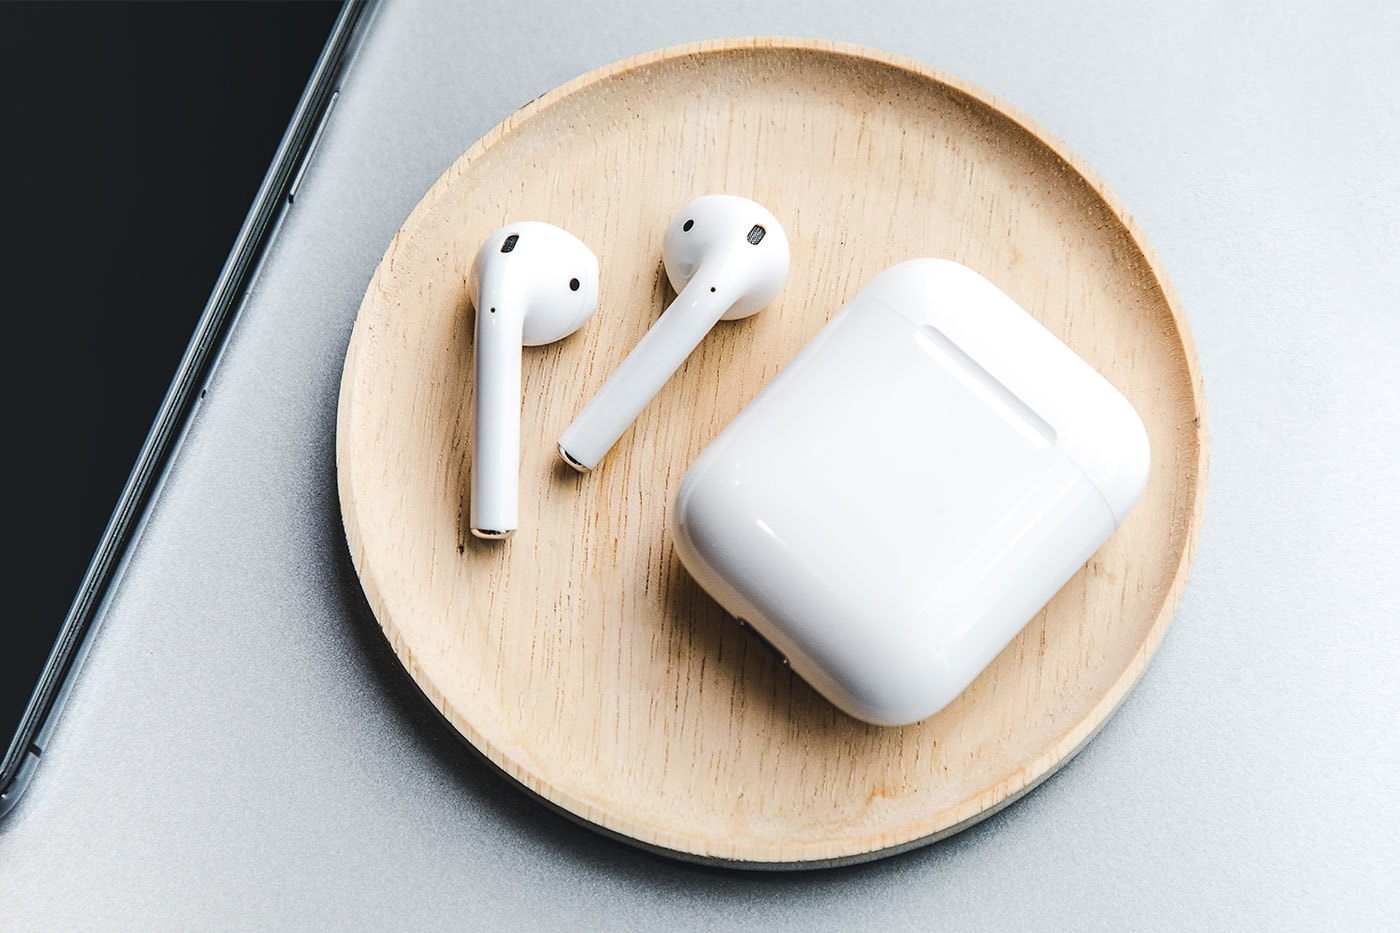 AirPods Pro 2 はロスレスオーディオに対応との噂 apple AirPods Pro 2 Could Support Lossless Audio